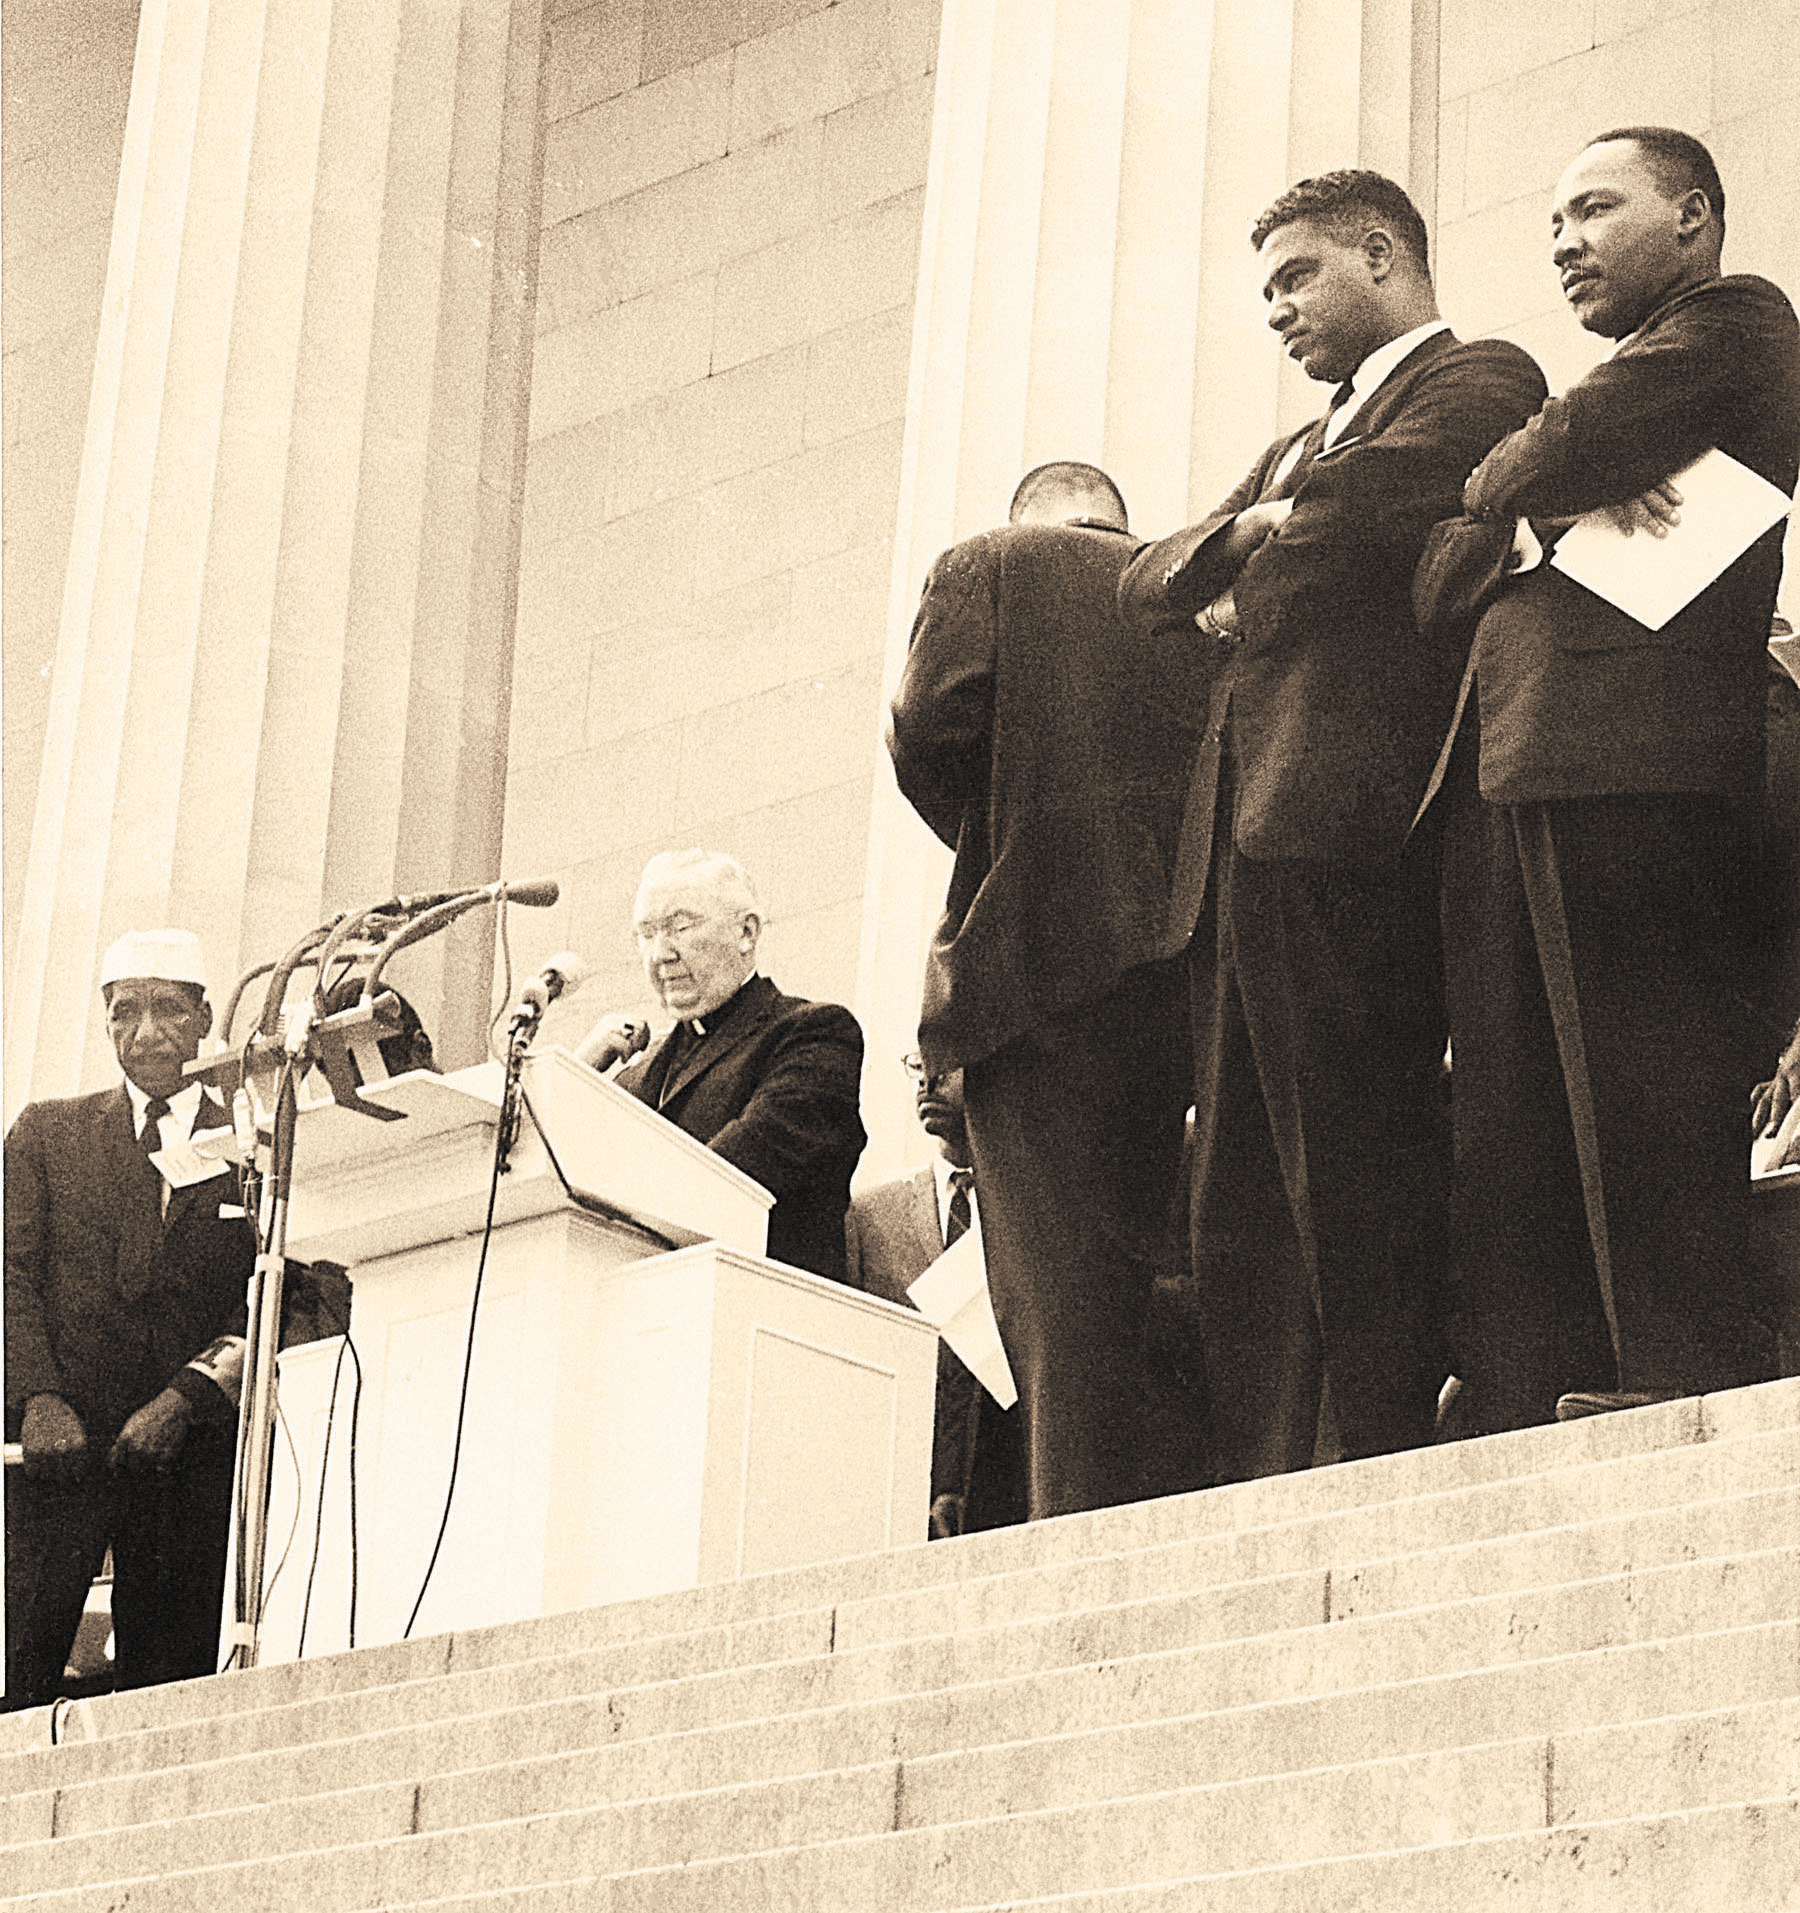 Cardinal O'Boyle gives the invocation at the 1963 March on Washington